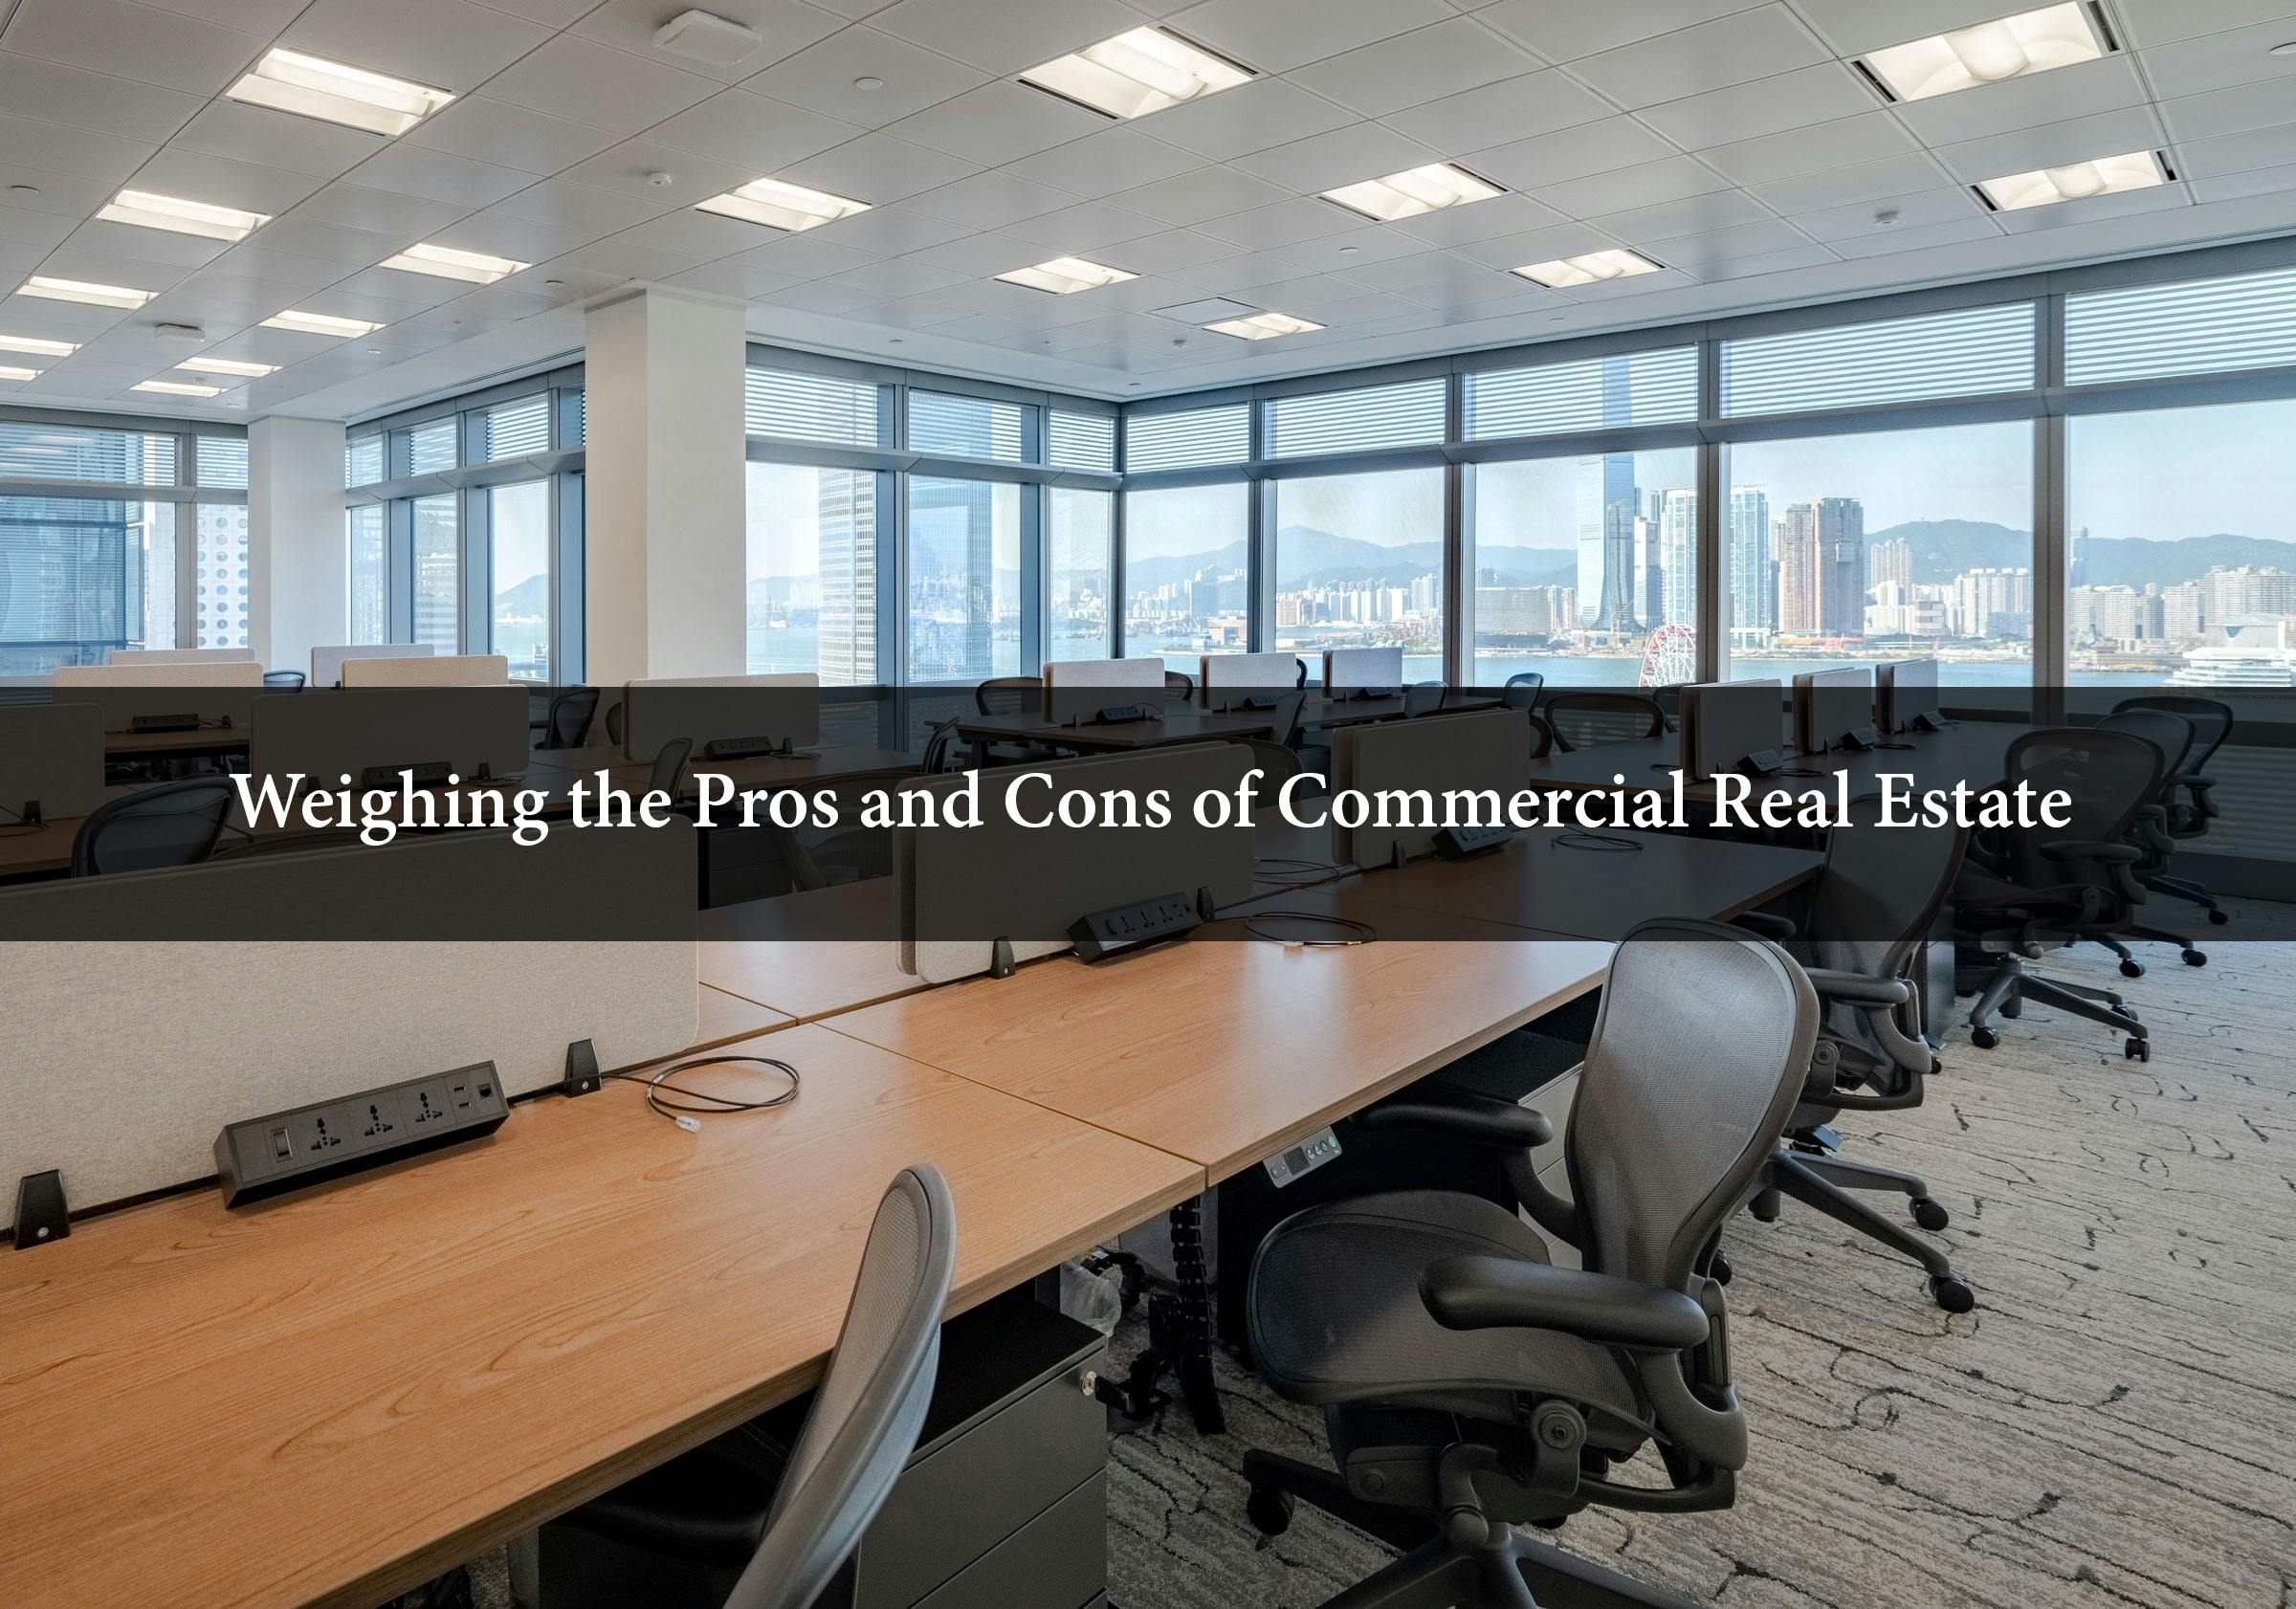 Weighing the Pros and Cons of Commercial Real Estate